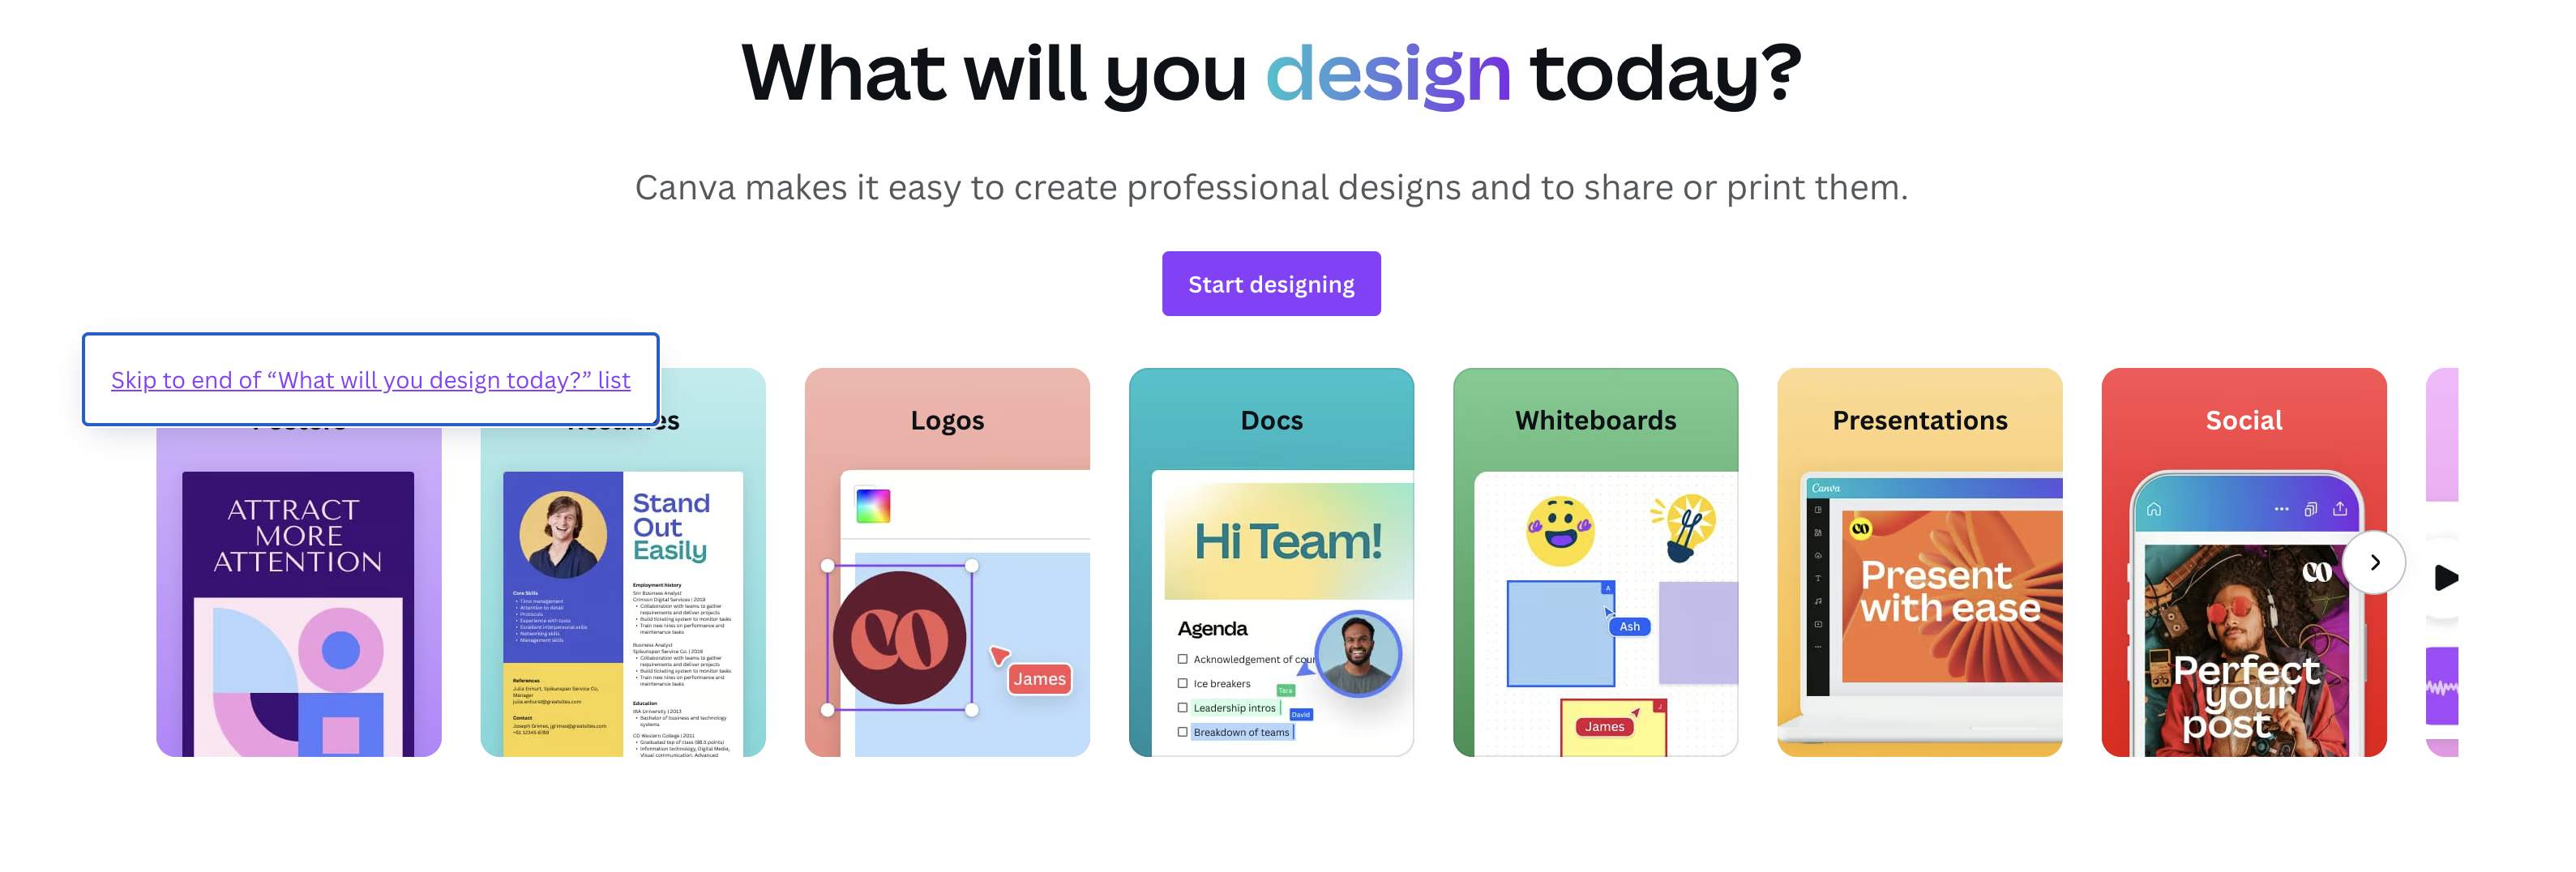 'What will you design today?' section and skip link with the text "Skip to end of What will you design today? list"